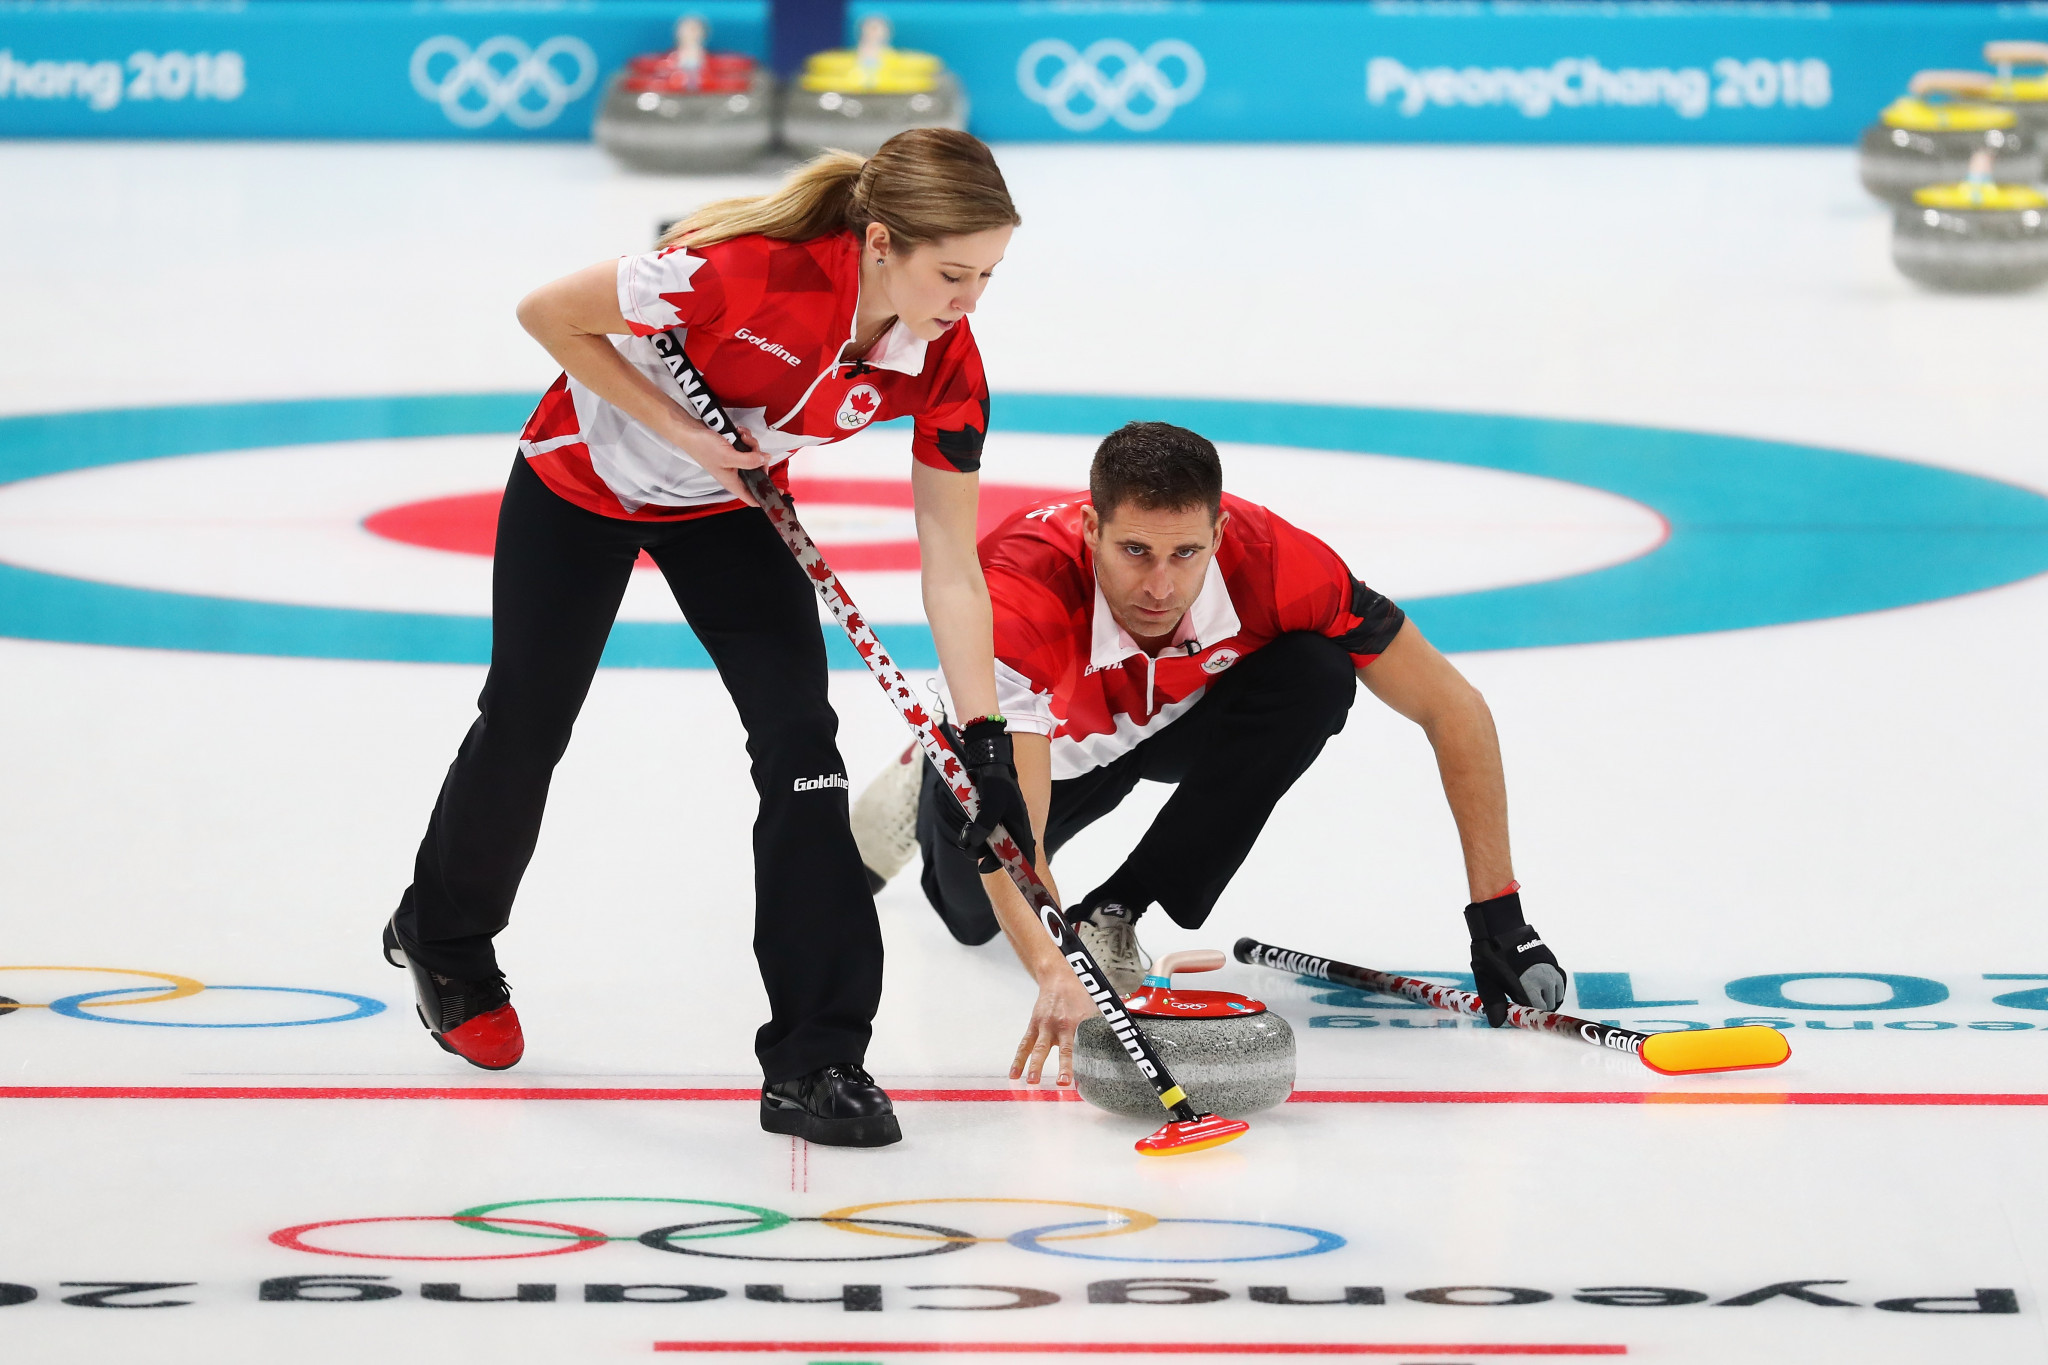 Canadians Kaitlyn Lawes and John Morris were crowned mixed doubles champions at Pyeongchang 2018 ©Getty Images